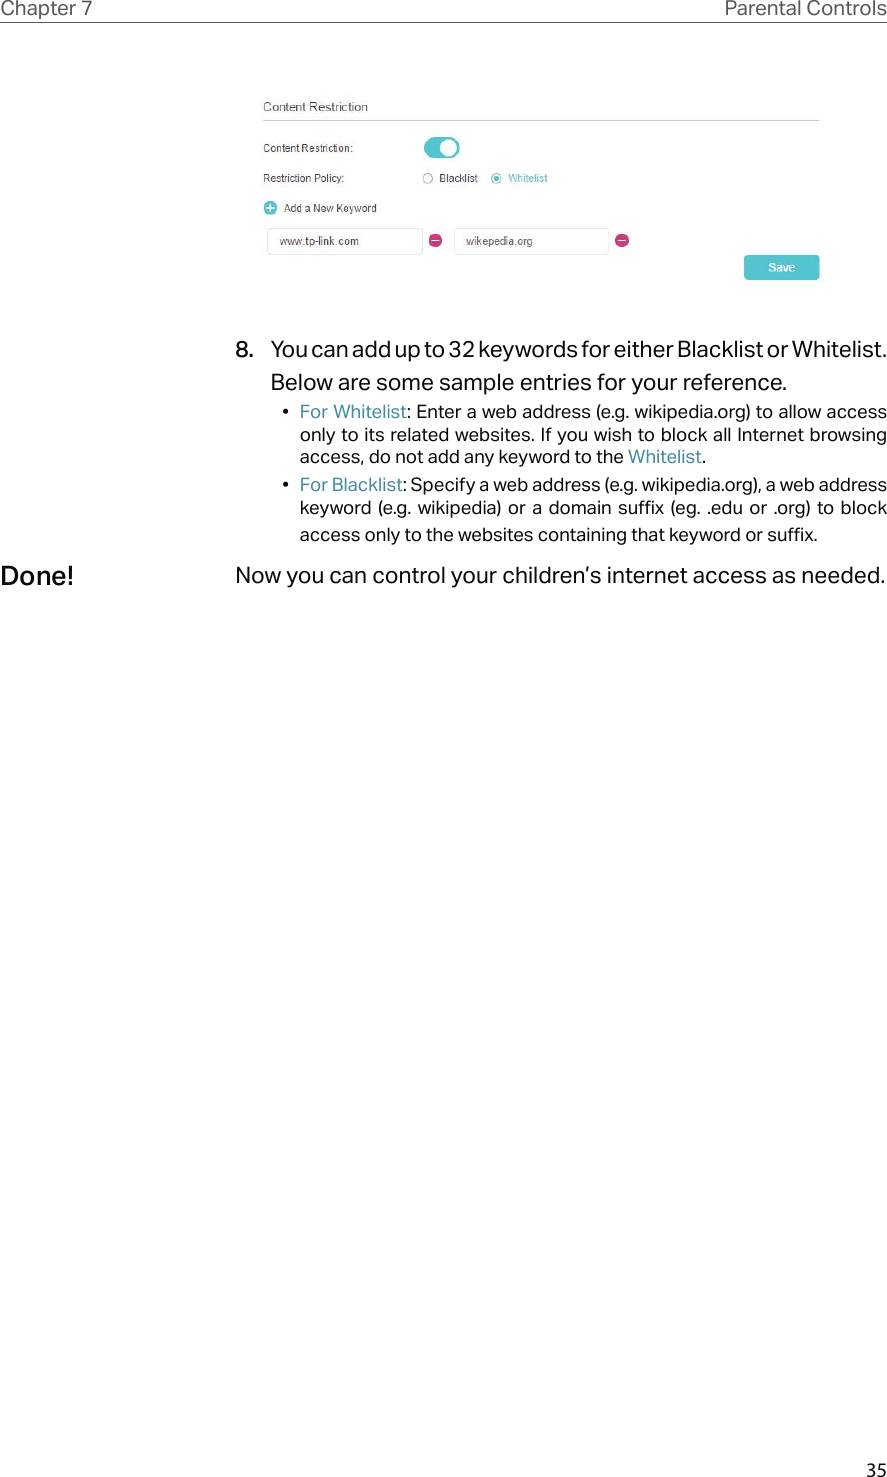 35Chapter 7 Parental Controls8.  You can add up to 32 keywords for either Blacklist or Whitelist. Below are some sample entries for your reference.•  For Whitelist: Enter a web address (e.g. wikipedia.org) to allow access only to its related websites. If you wish to block all Internet browsing access, do not add any keyword to the Whitelist.•  For Blacklist: Specify a web address (e.g. wikipedia.org), a web address keyword (e.g. wikipedia) or a domain suffix (eg. .edu or .org) to block access only to the websites containing that keyword or suffix.Now you can control your children’s internet access as needed.Done!